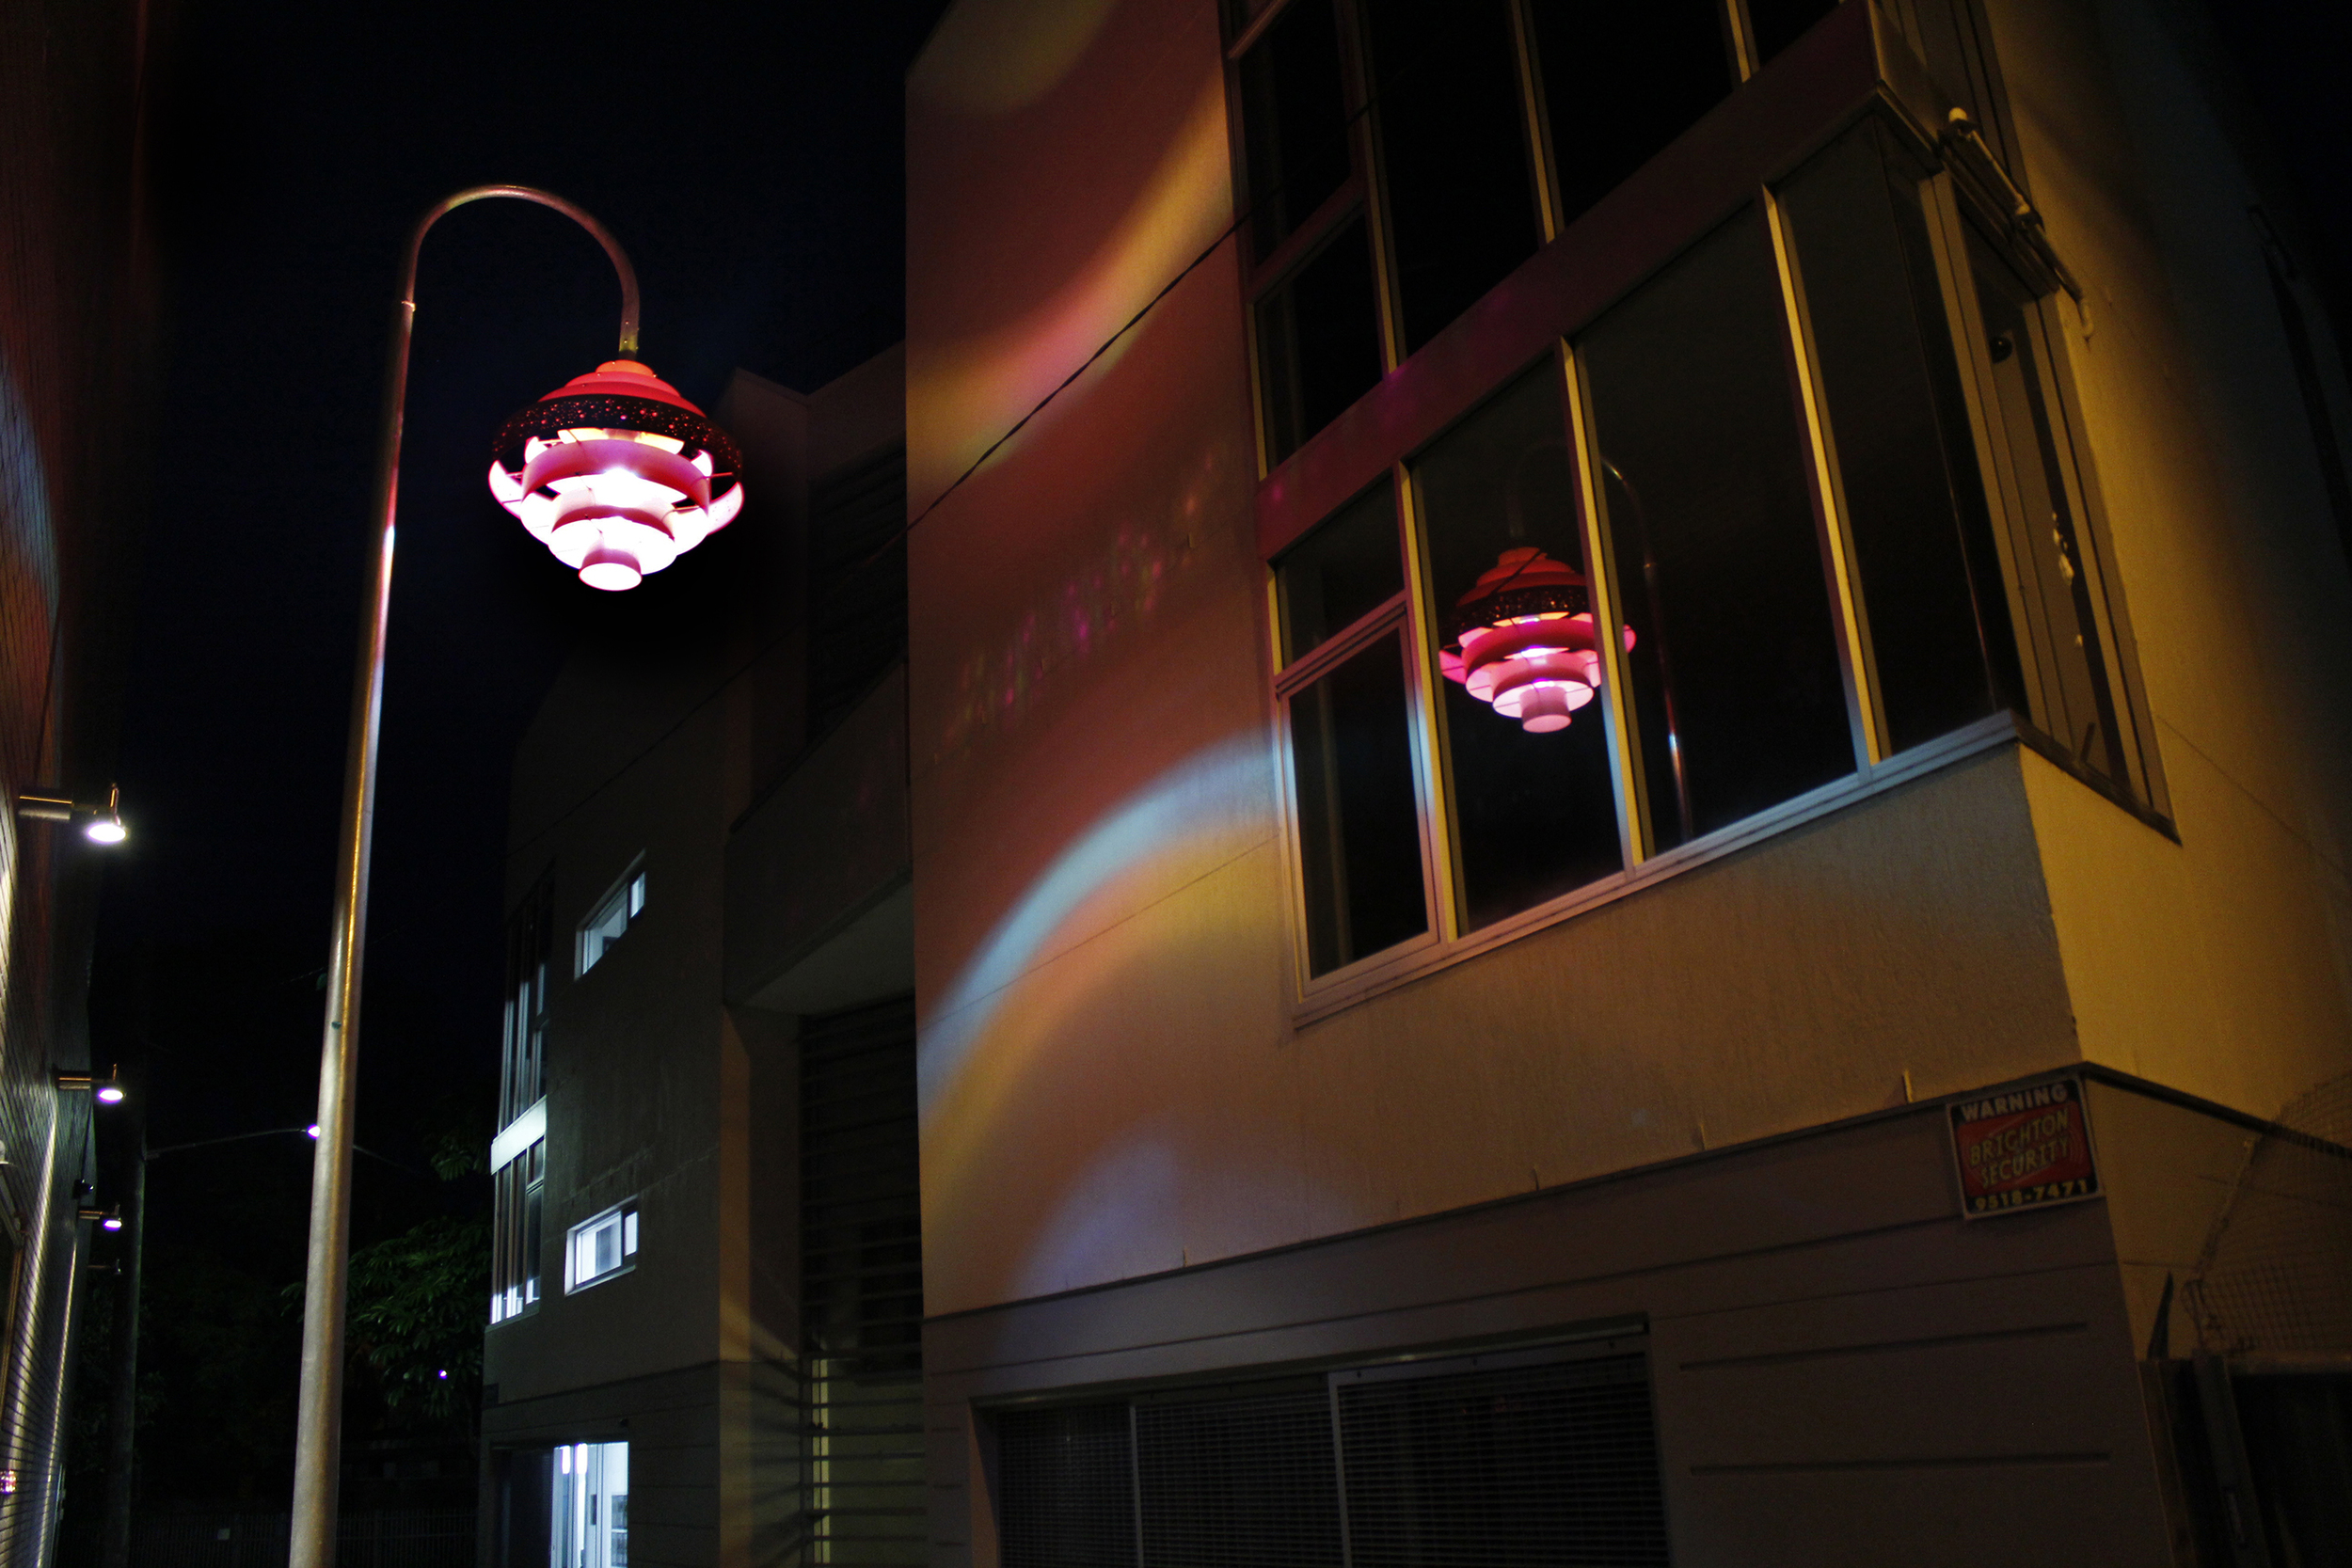 Mikala Dwyer, A Lamp for Mary, 2010, City of Sydney, Mary’s Place, Surry Hills, Sydney